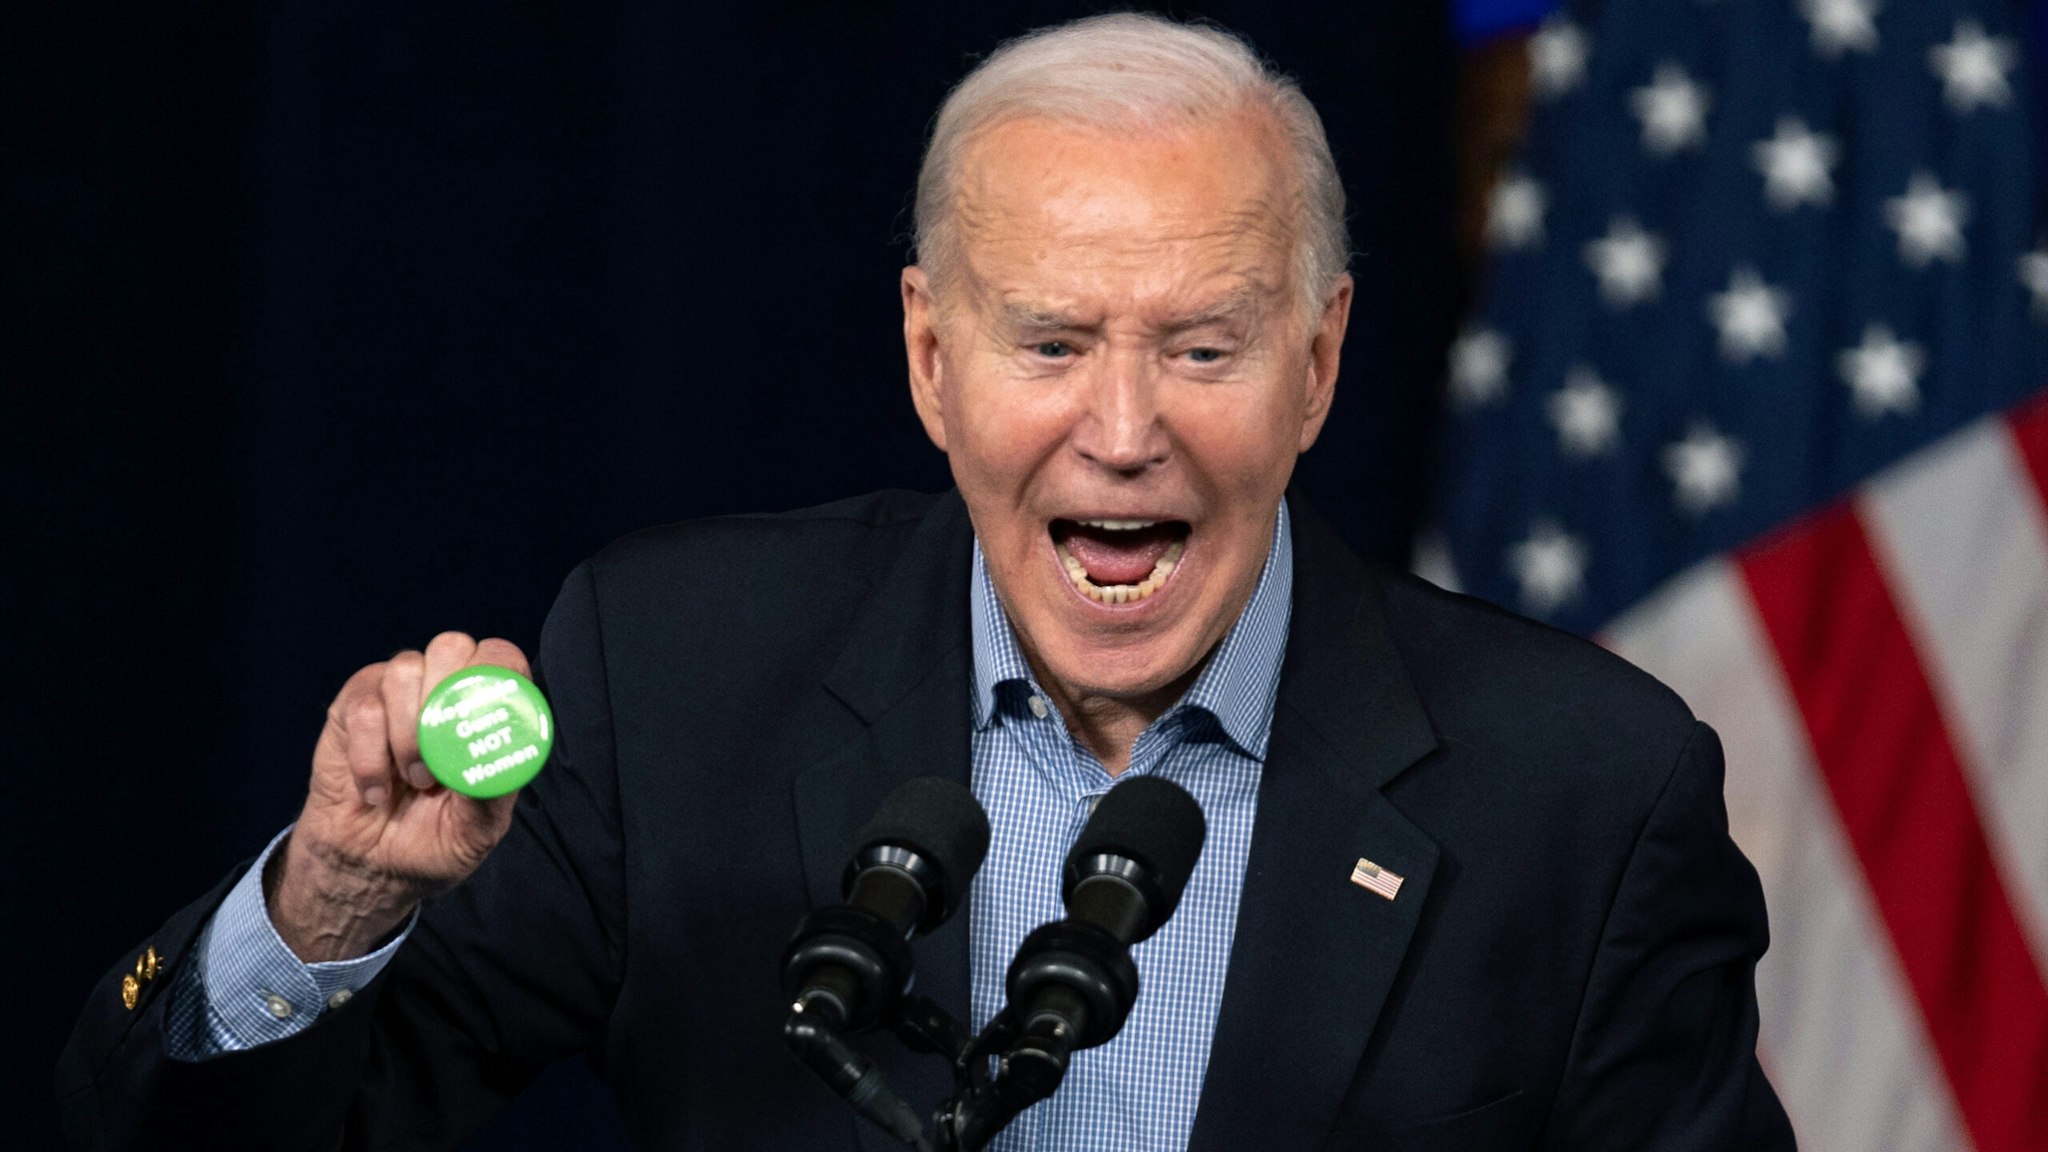 ATLANTA, GEORGIA - MARCH 9: President Joe Biden picks up a button thrown on stage that reads "Regulate Guns not Women" during a campaign event at Pullman Yards on March 9, 2024 in Atlanta, Georgia. President Biden and Former President Donald Trump are both campaigning in Georgia today ahead of the Primary election voting taking place on Tuesday.